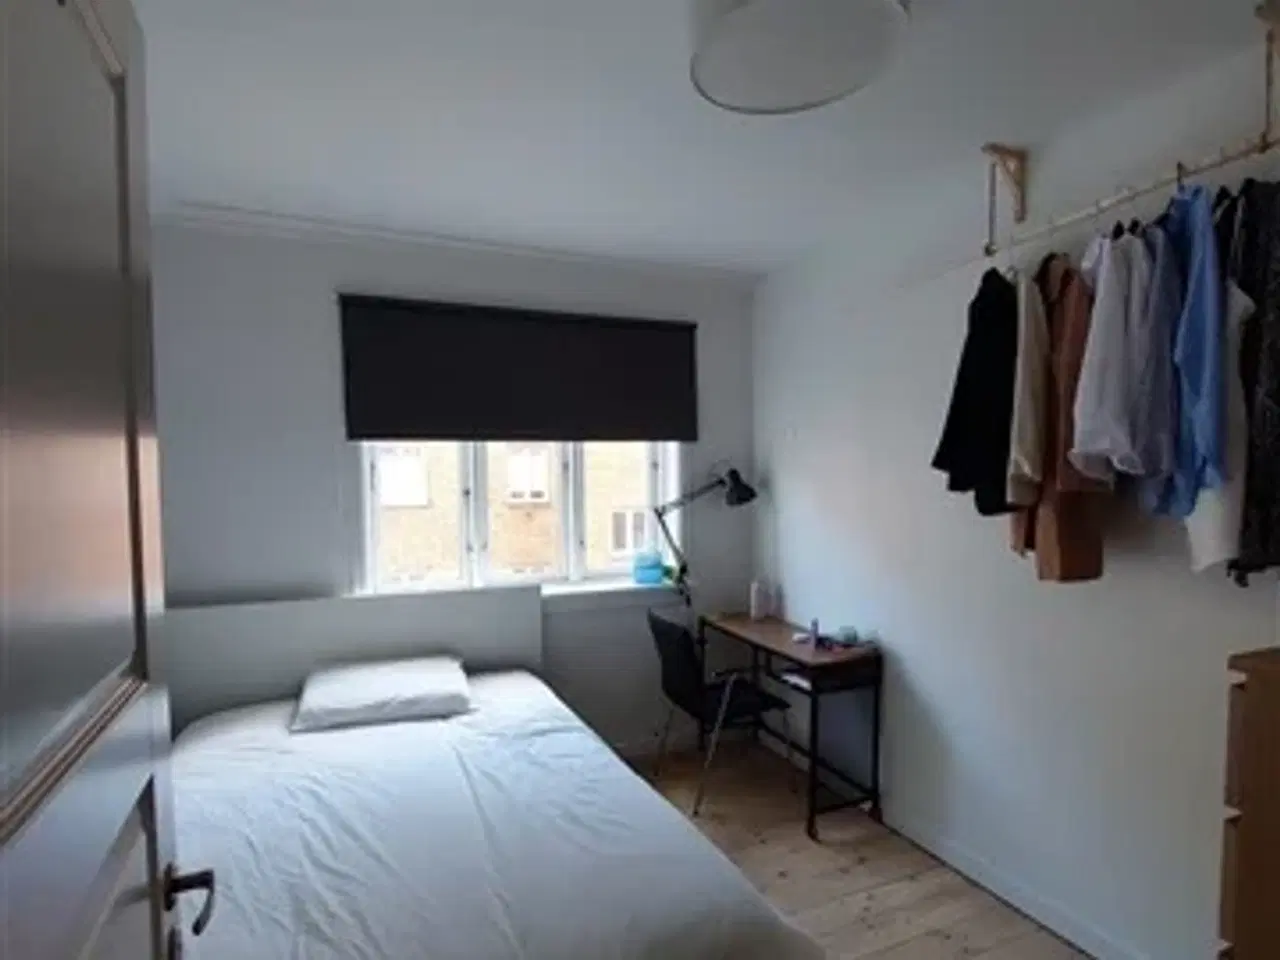 Billede 1 - Looking for a roommate for cosy flat by Lyngby Station, Kongens Lyngby, København